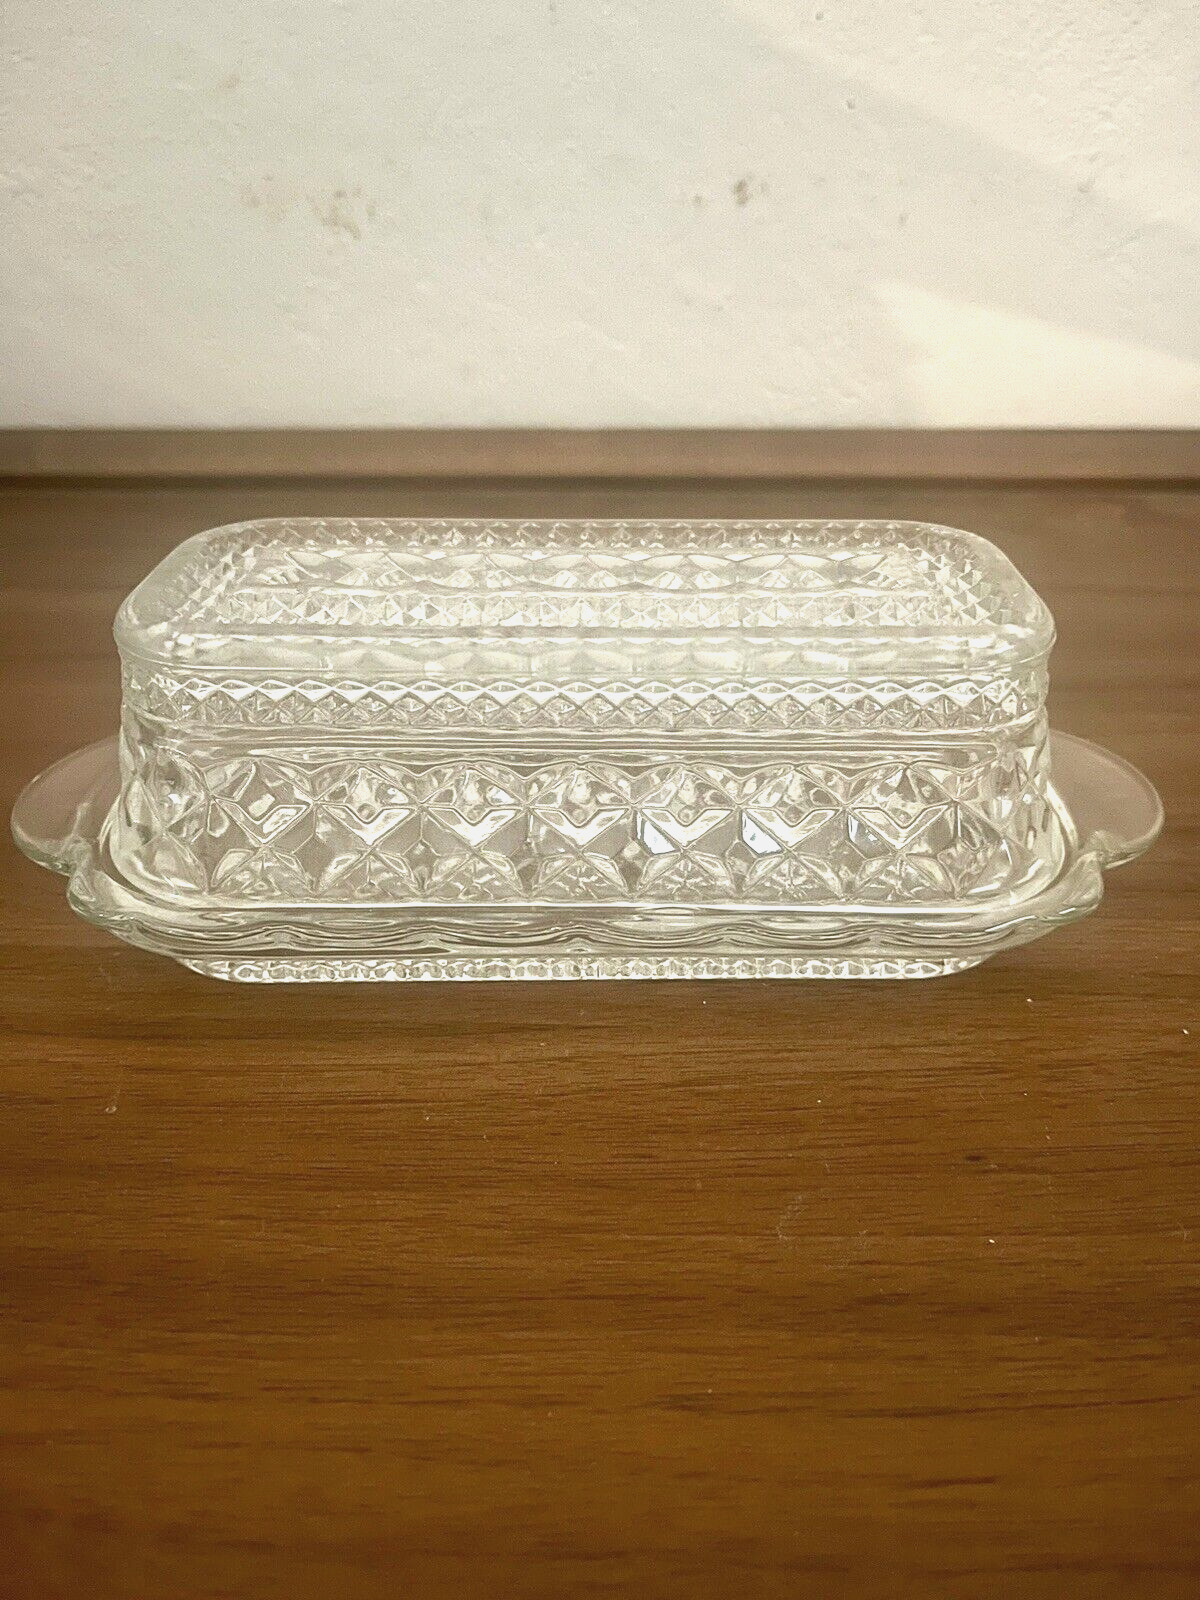 ANCHOR HOCKING Wexford Clear Quarter Pound Covered Butter Dish 